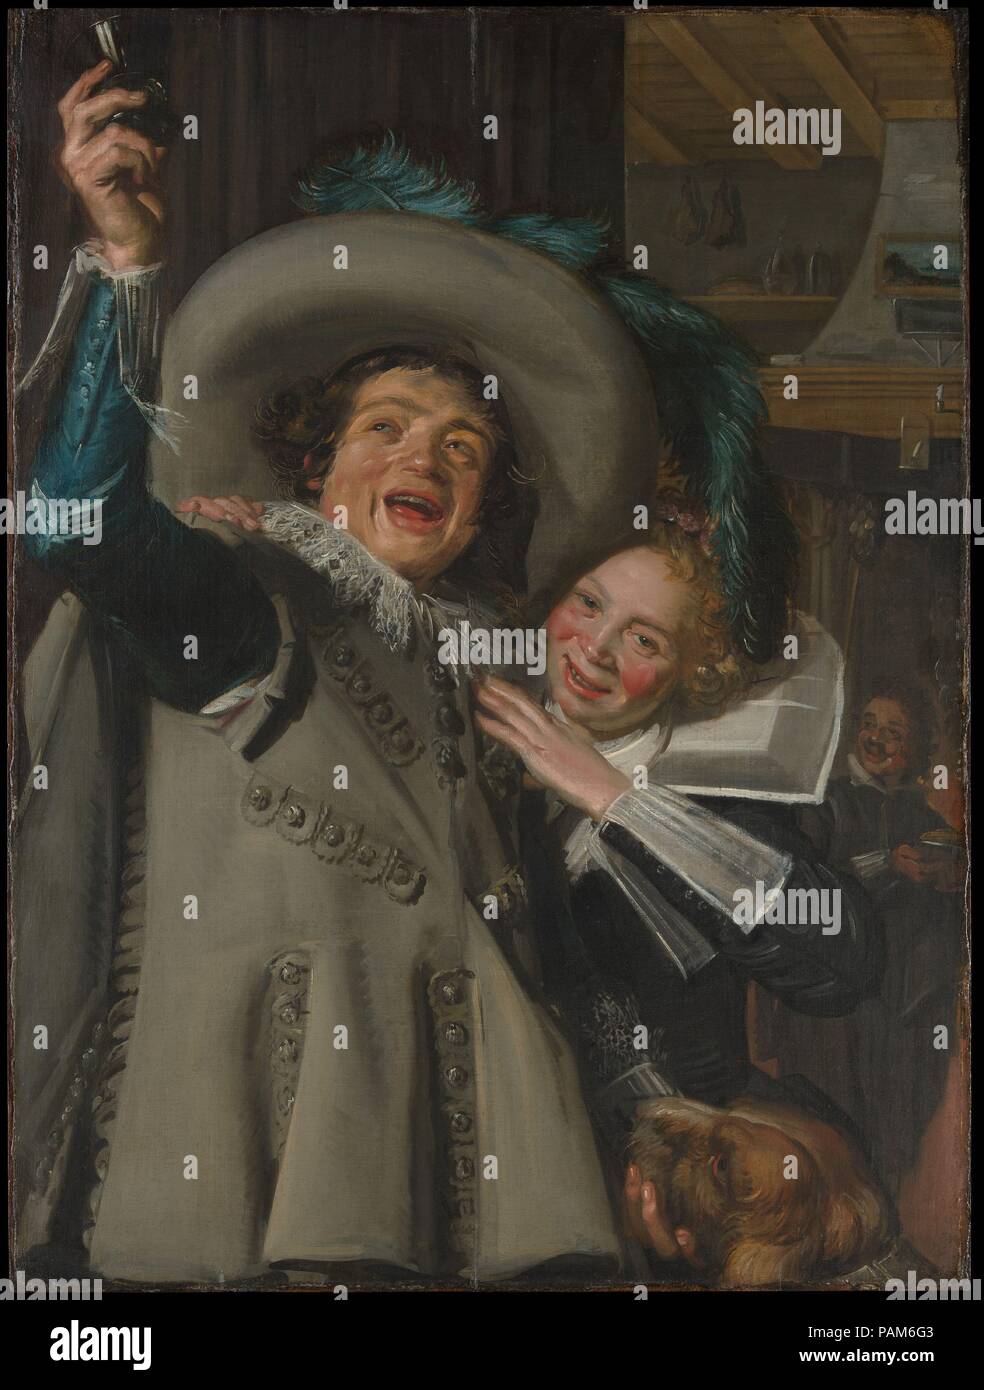 Young Man and Woman in an Inn ('Yonker Ramp and His Sweetheart'). Artist: Frans Hals (Dutch, Antwerp 1582/83-1666 Haarlem). Dimensions: 41 1/2 x 31 1/4 in. (105.4 x 79.4 cm). Date: 1623.  The traditional title dates from the eighteenth century and is based upon a mistaken identification with Pieter Ramp, who appears in a group portrait of about 1627 by Hals. The figures here are a young man and his new acquaintance at the doorway of an inn. The dog suggests not fidelity but spontaneous affection. This canvas, Hals's only known dated genre scene, recalls earlier Netherlandish images of the Prod Stock Photo